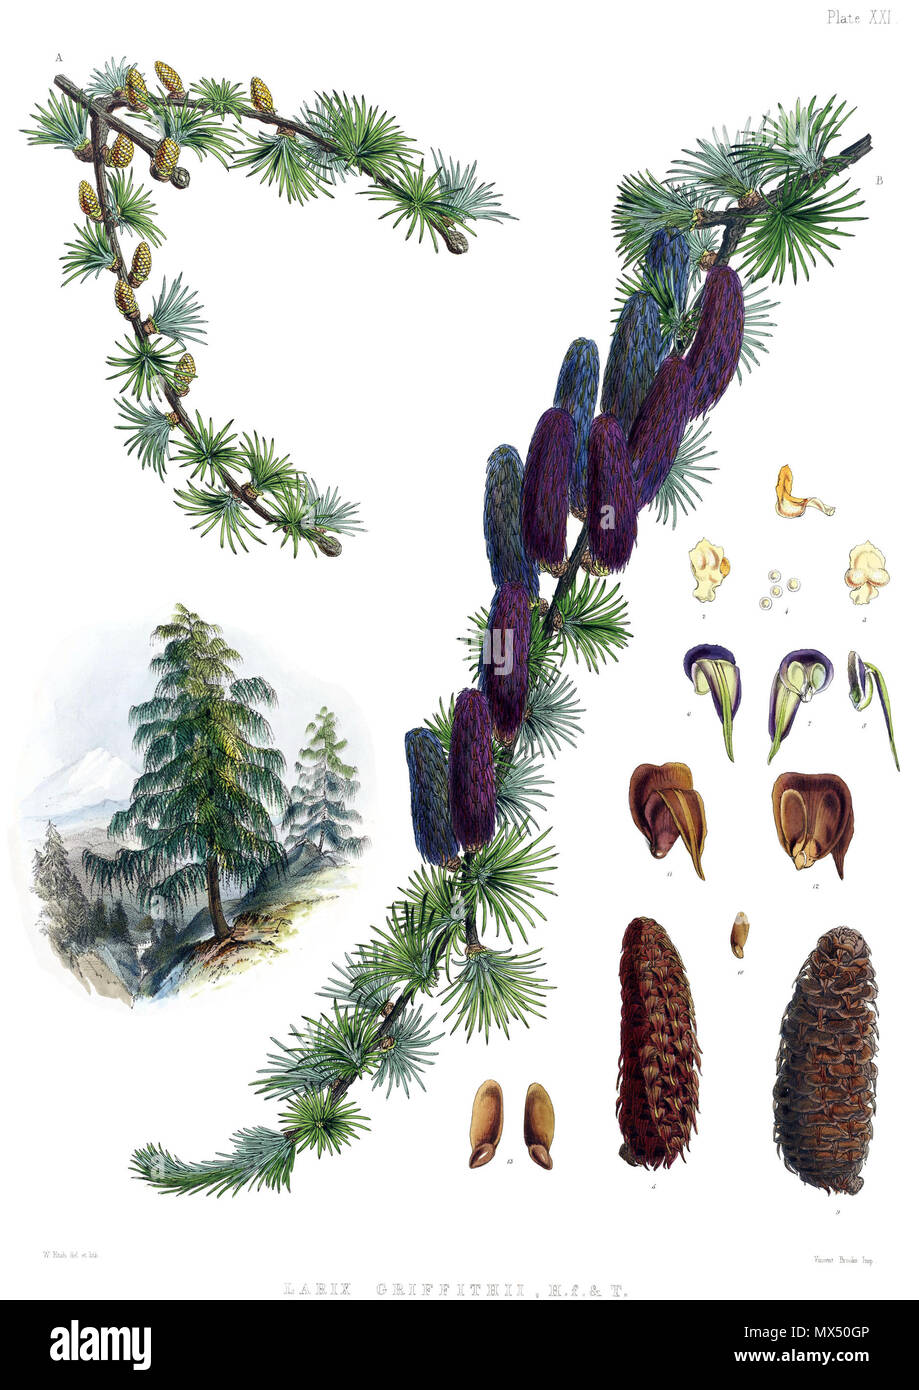 . Larix griffithii. Original caption: 'Plate XXI. A. Male branch. B. Female branch. Fig. 1, 2, 3. Anthers. 4. Pollen. 5. Young cone. 6, 7, 8. Scales and bracts. 9. Ripe cone. 10, 11. Its scales and bracts. 12. Ripe seeds. 13. The same :—all (but 5, 9, and 12) more or less magnified. Published 1855. Cathcart, John Fergusson (1802 - 1851) 360 Larix griffithii Stock Photo